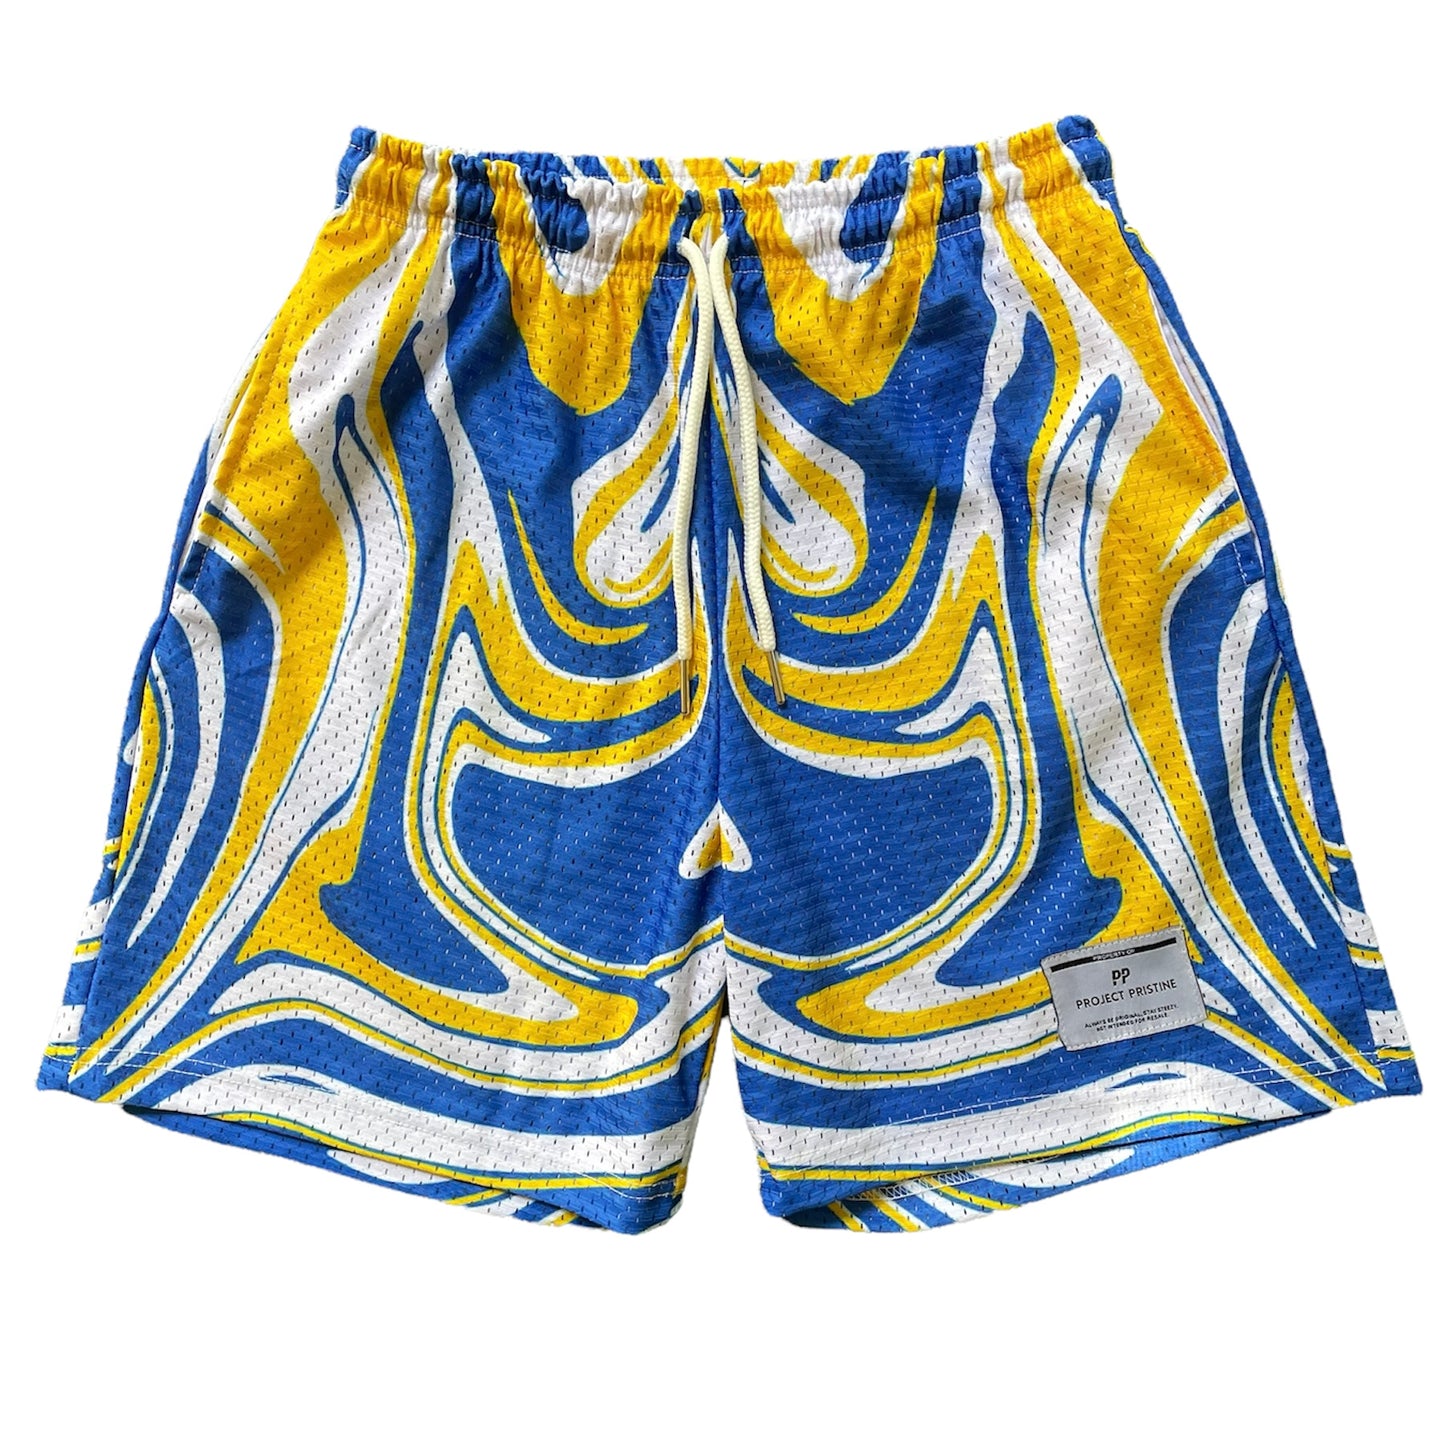 LA Chargers Marble Mesh Shorts